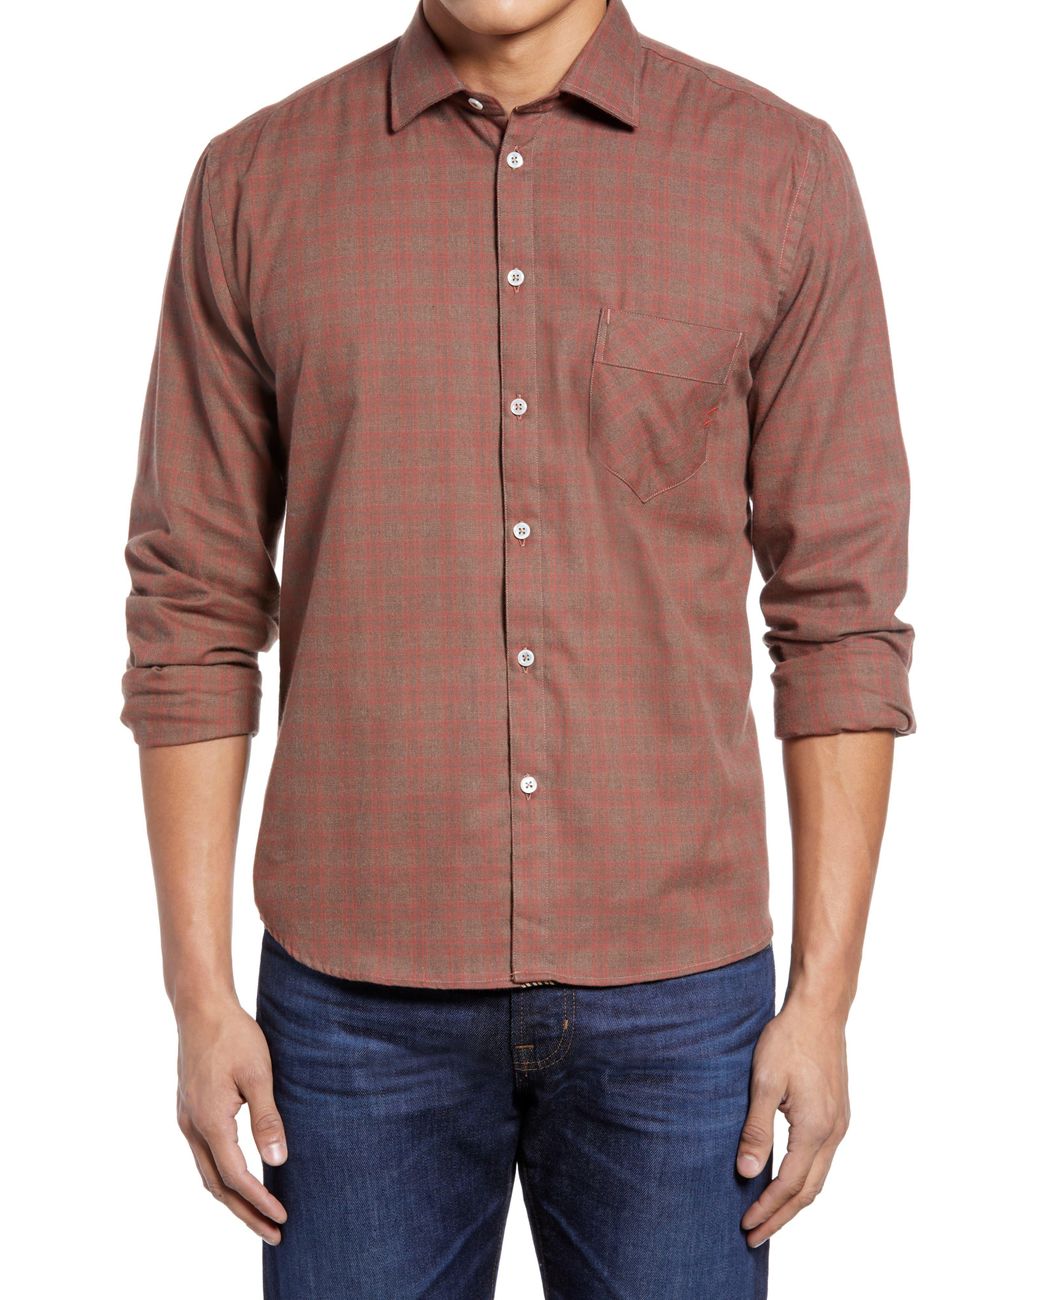 brown and red button shirt